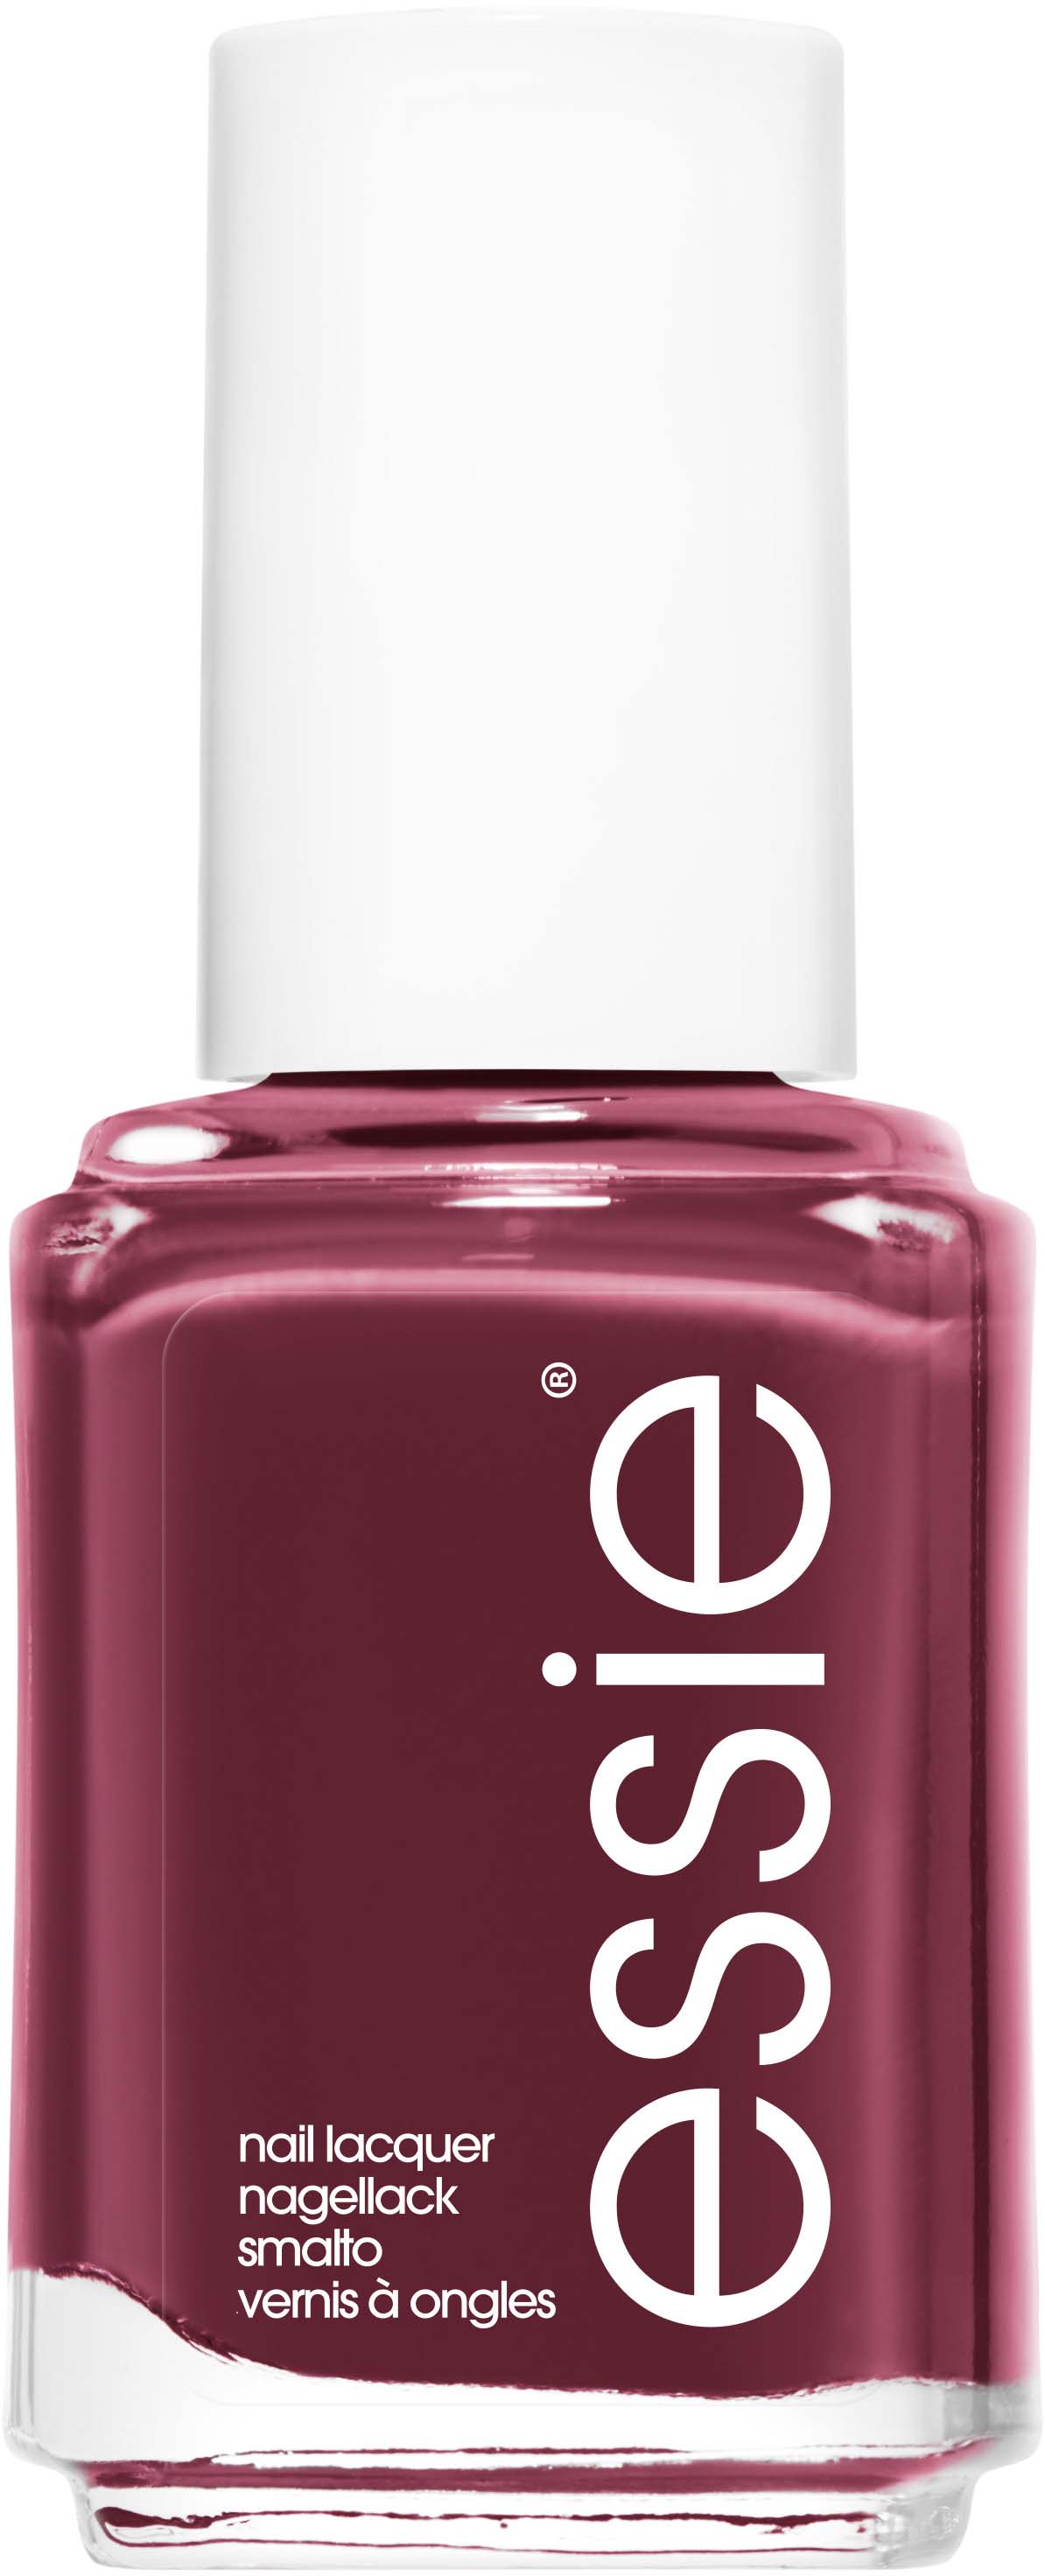 Lacquer optional 497 clothing Nail Essie